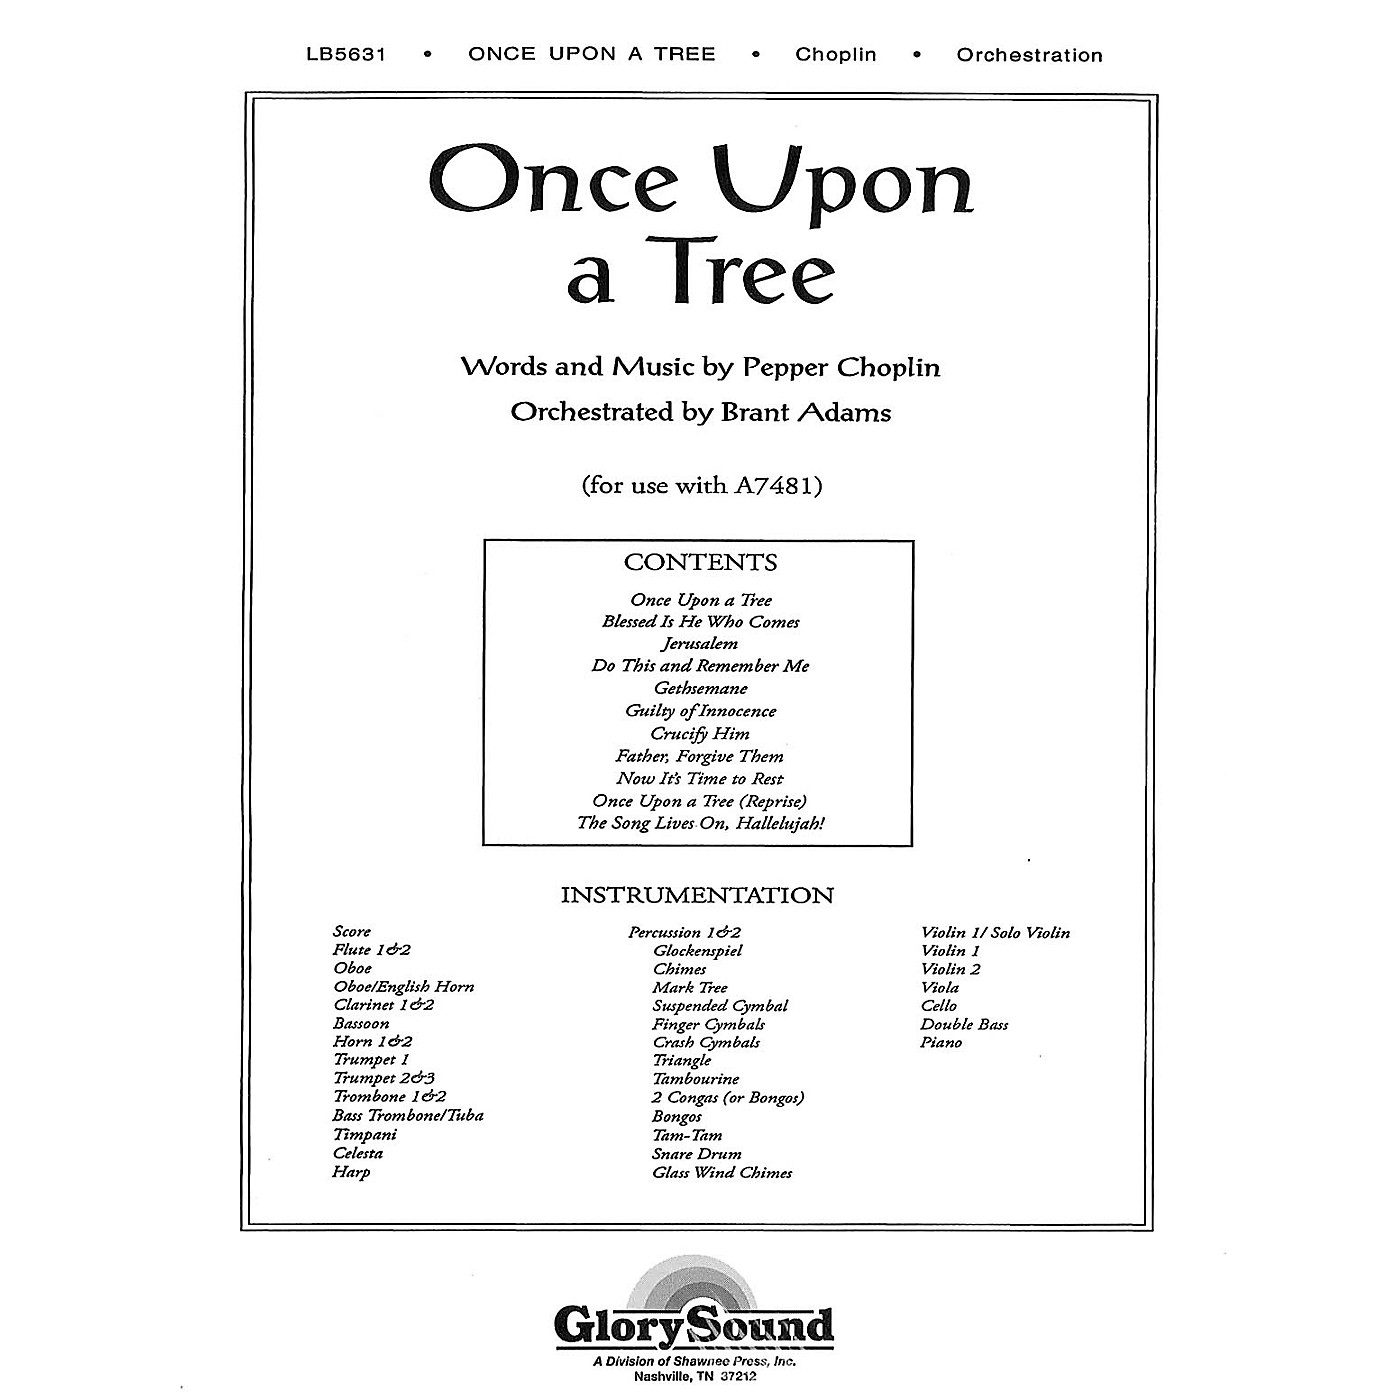 Shawnee Press Once Upon a Tree (Orchestration) Score & Parts composed by Pepper Choplin thumbnail